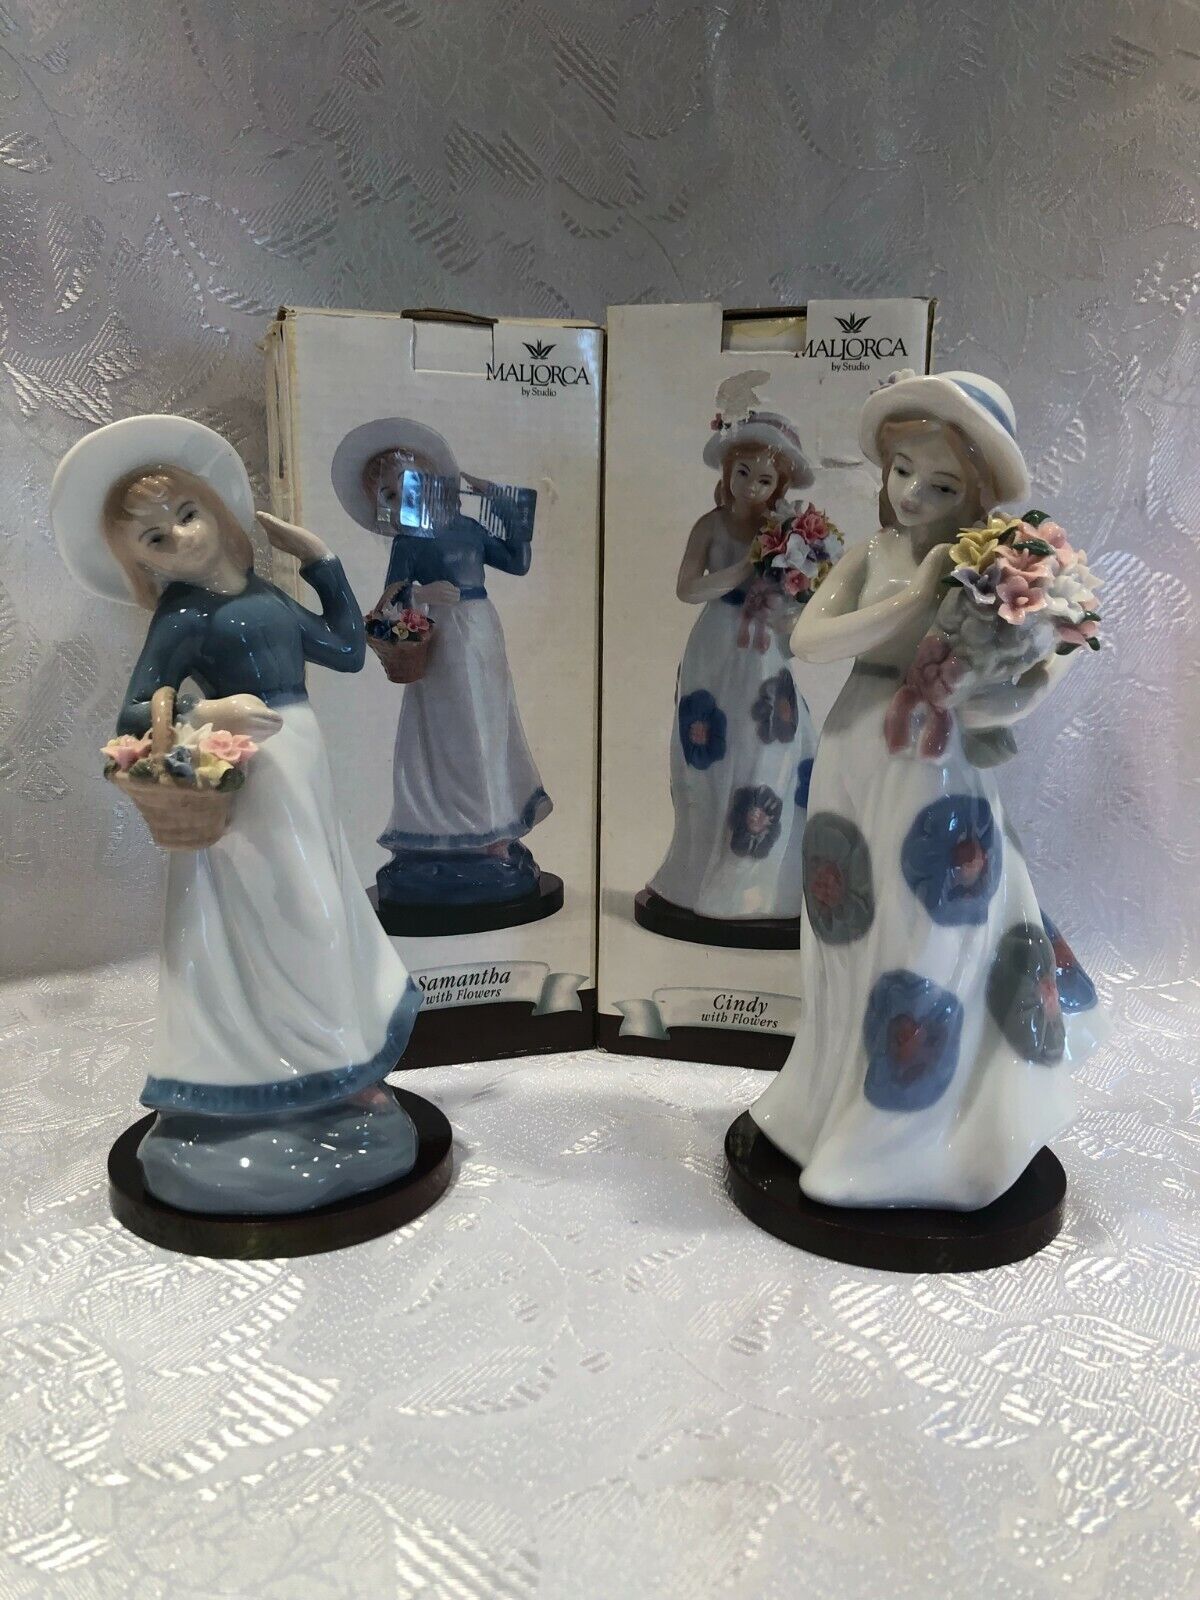 Vintage Cindy & Samantha with Flowers Mallorca by Studio 2 Porcelain Figurines